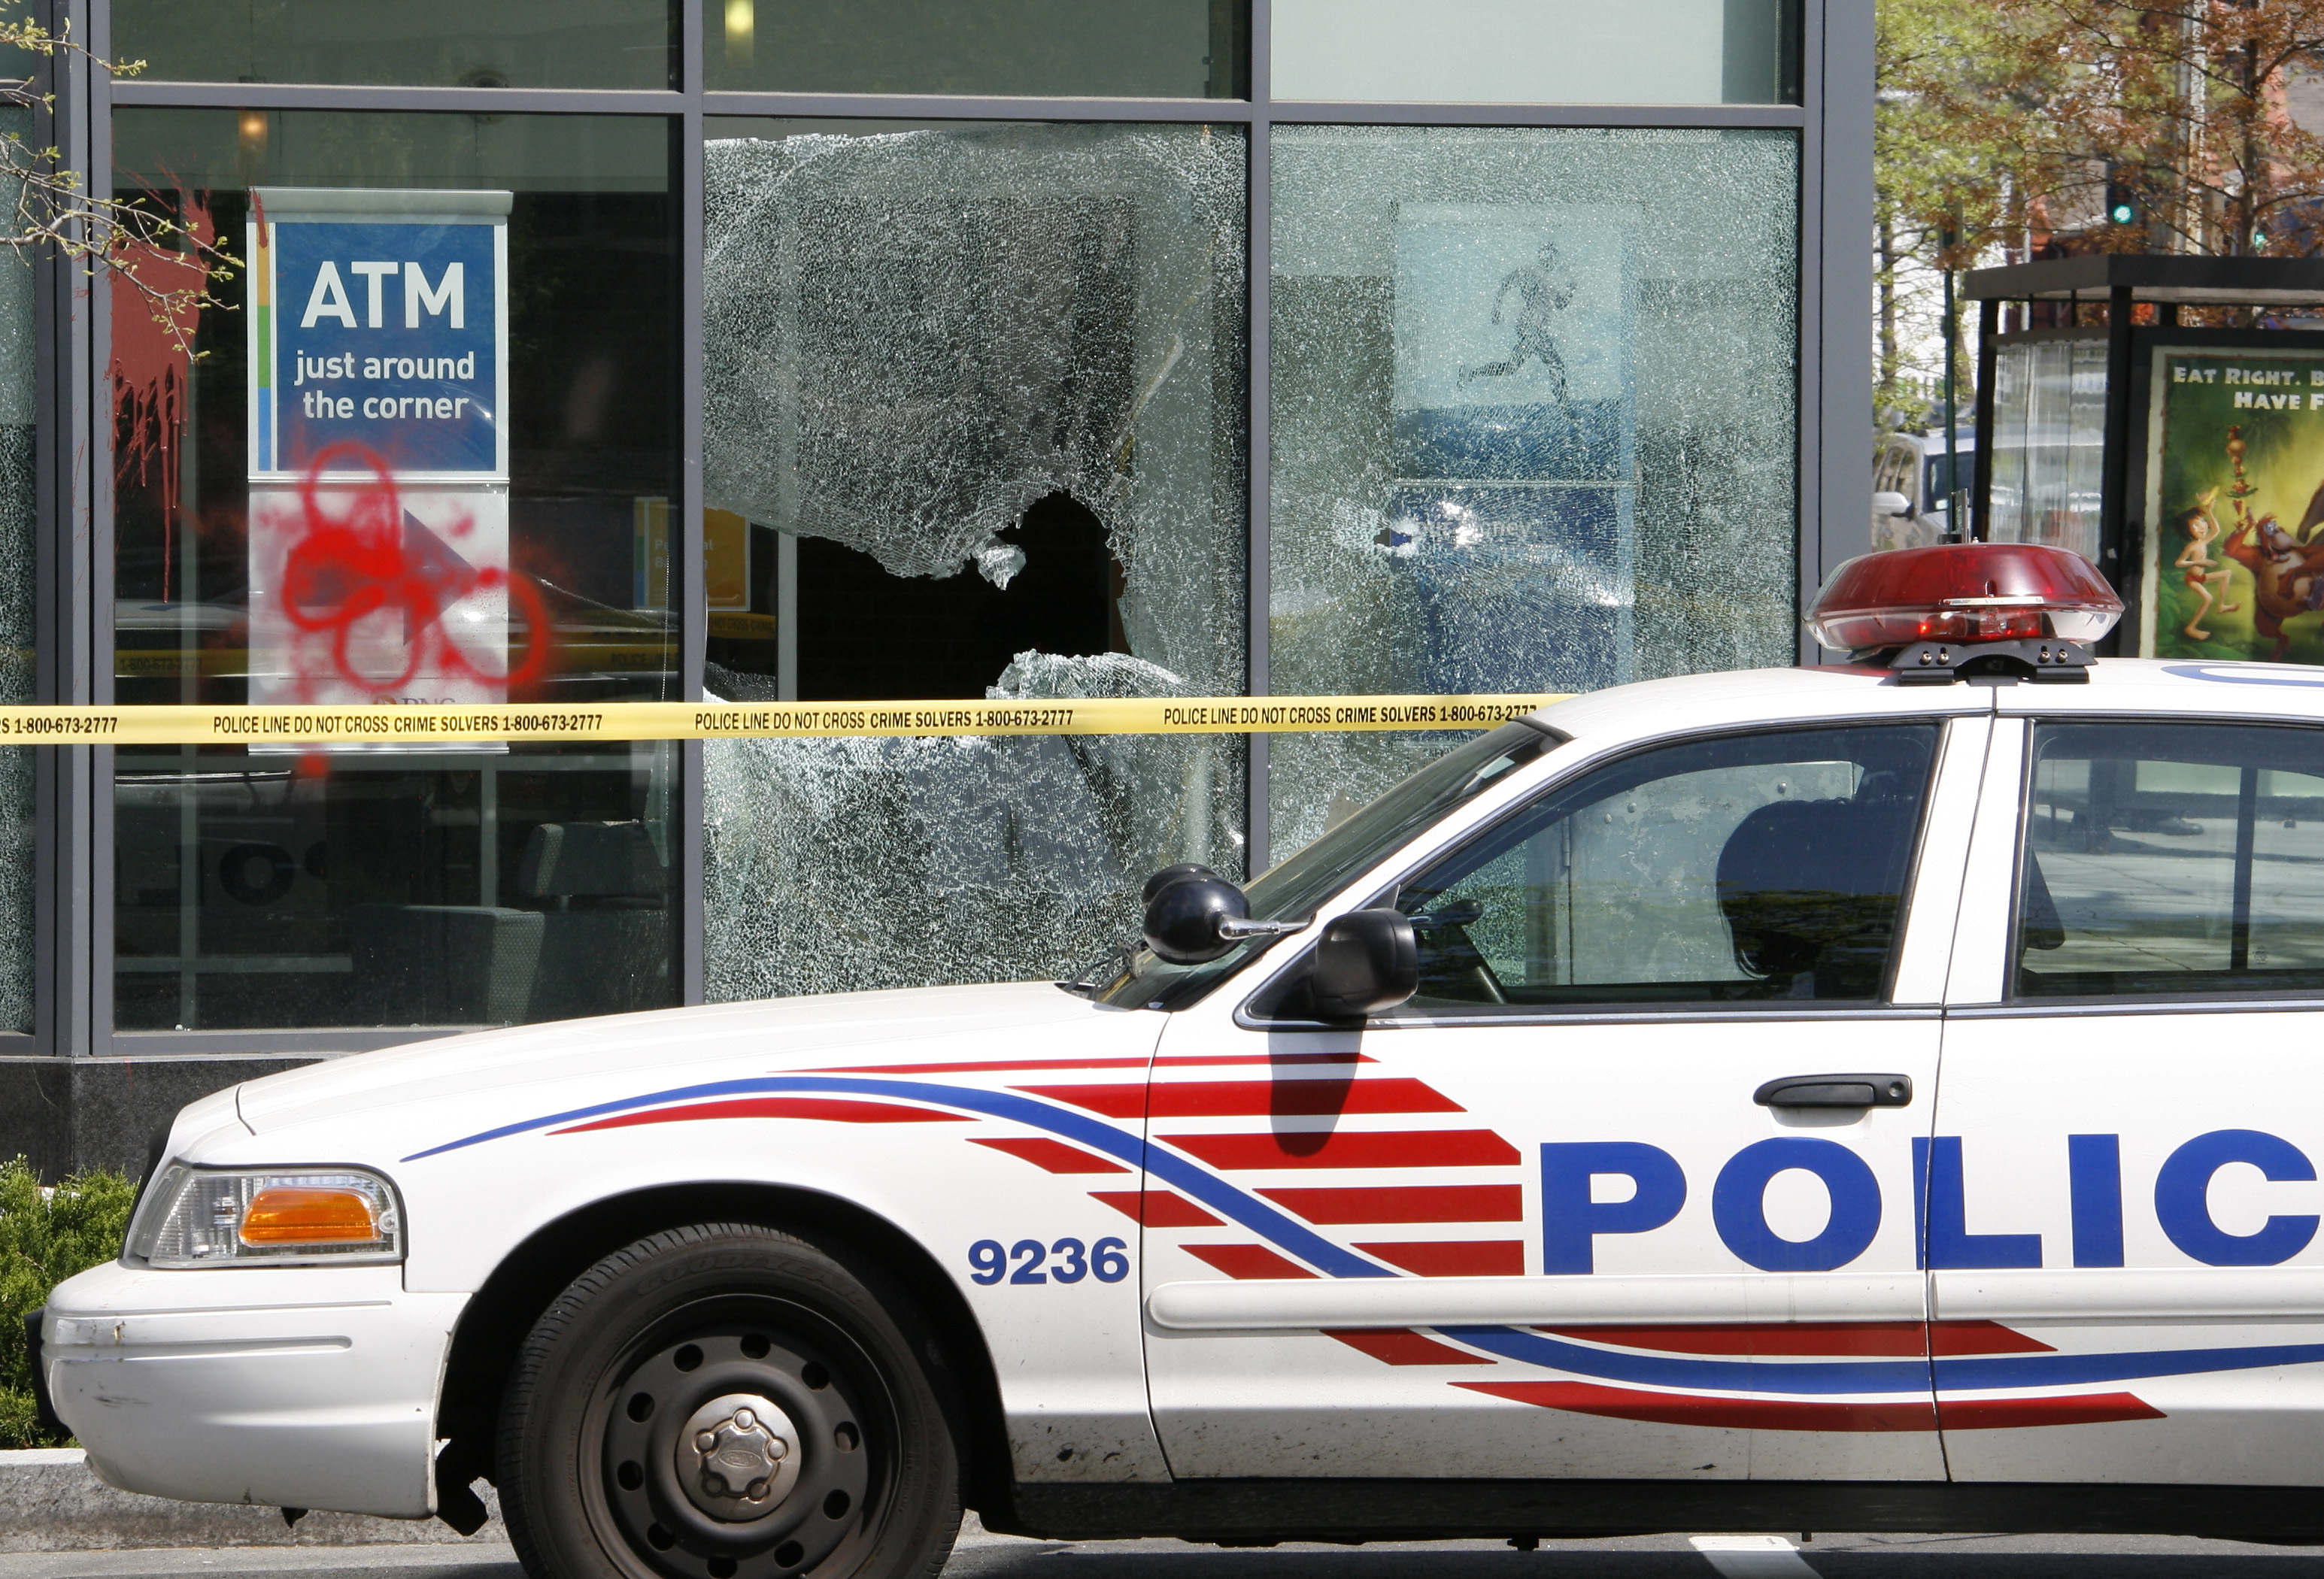 A police car, parked in front of a bank that has had its windows broken and smashed.